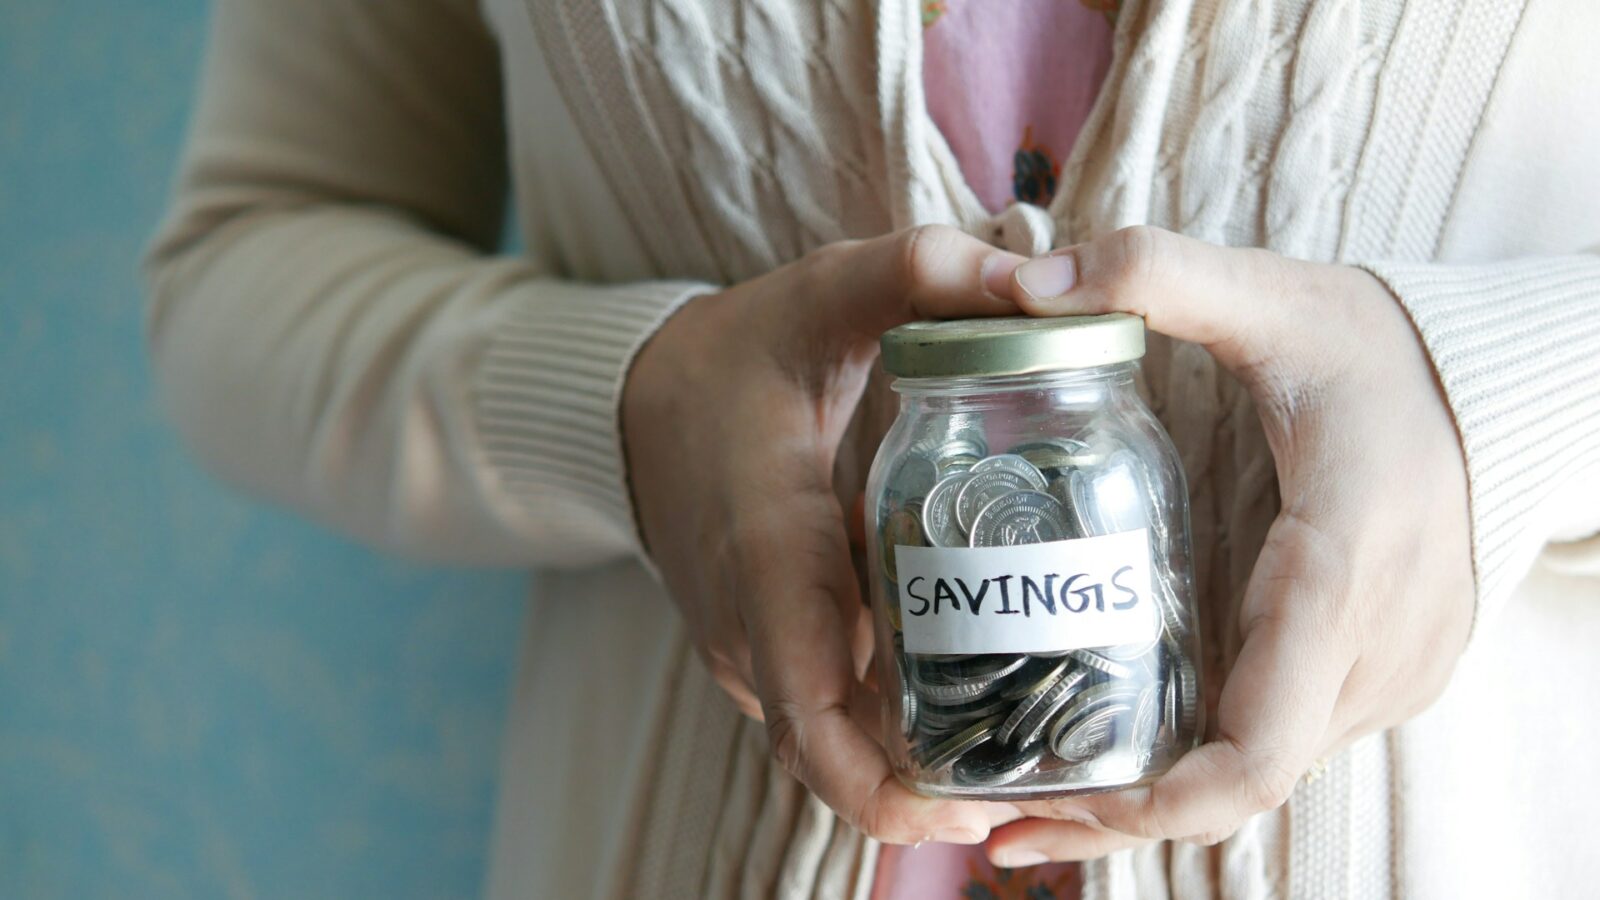 woman holding jar of saving money representing structured settlement funds being treated as income